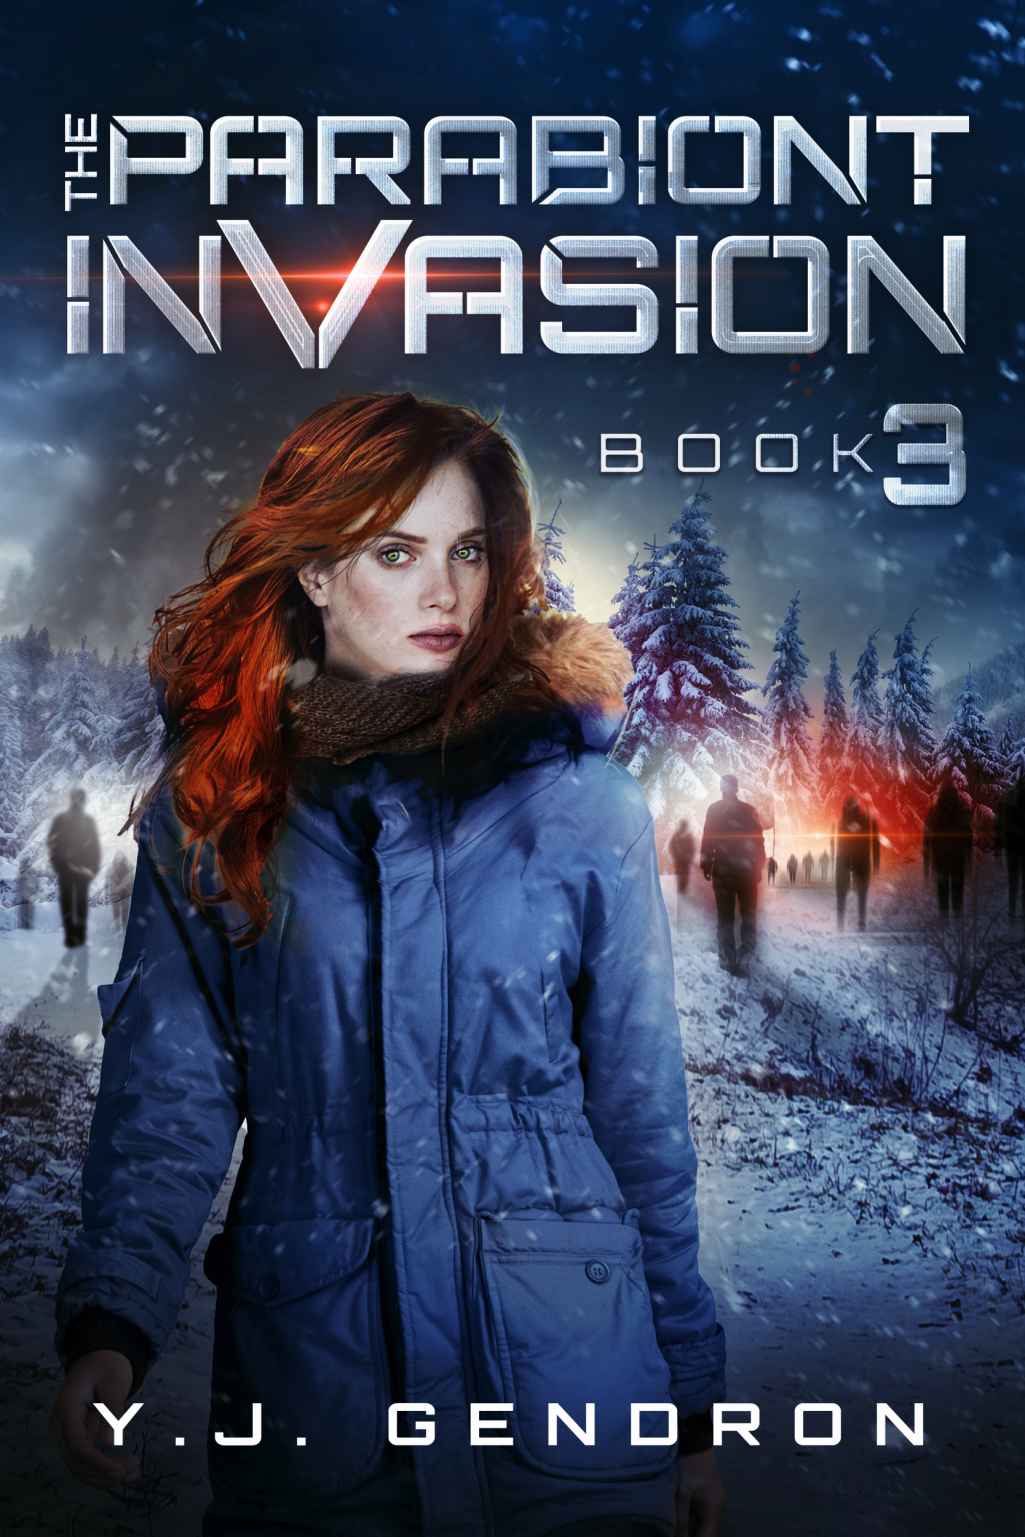 The Parabiont Invasion Book 3